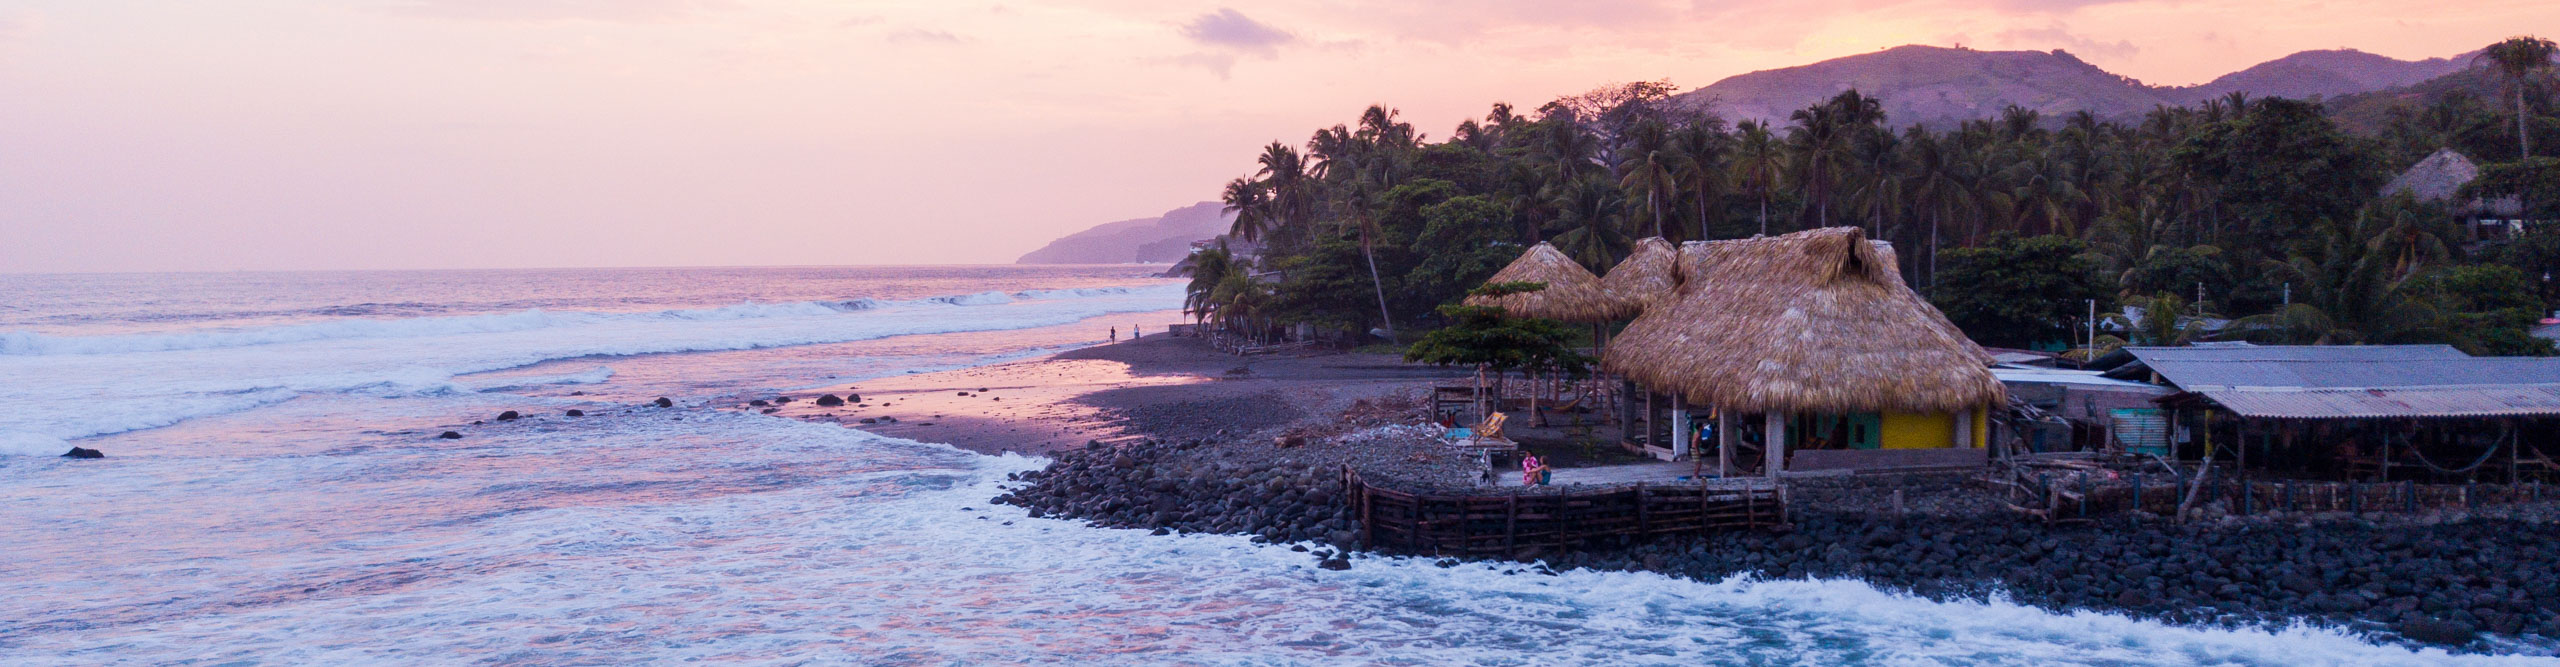 Sunset along the coastline with waves crashing and a pink sky in El Salvador near El Zonter